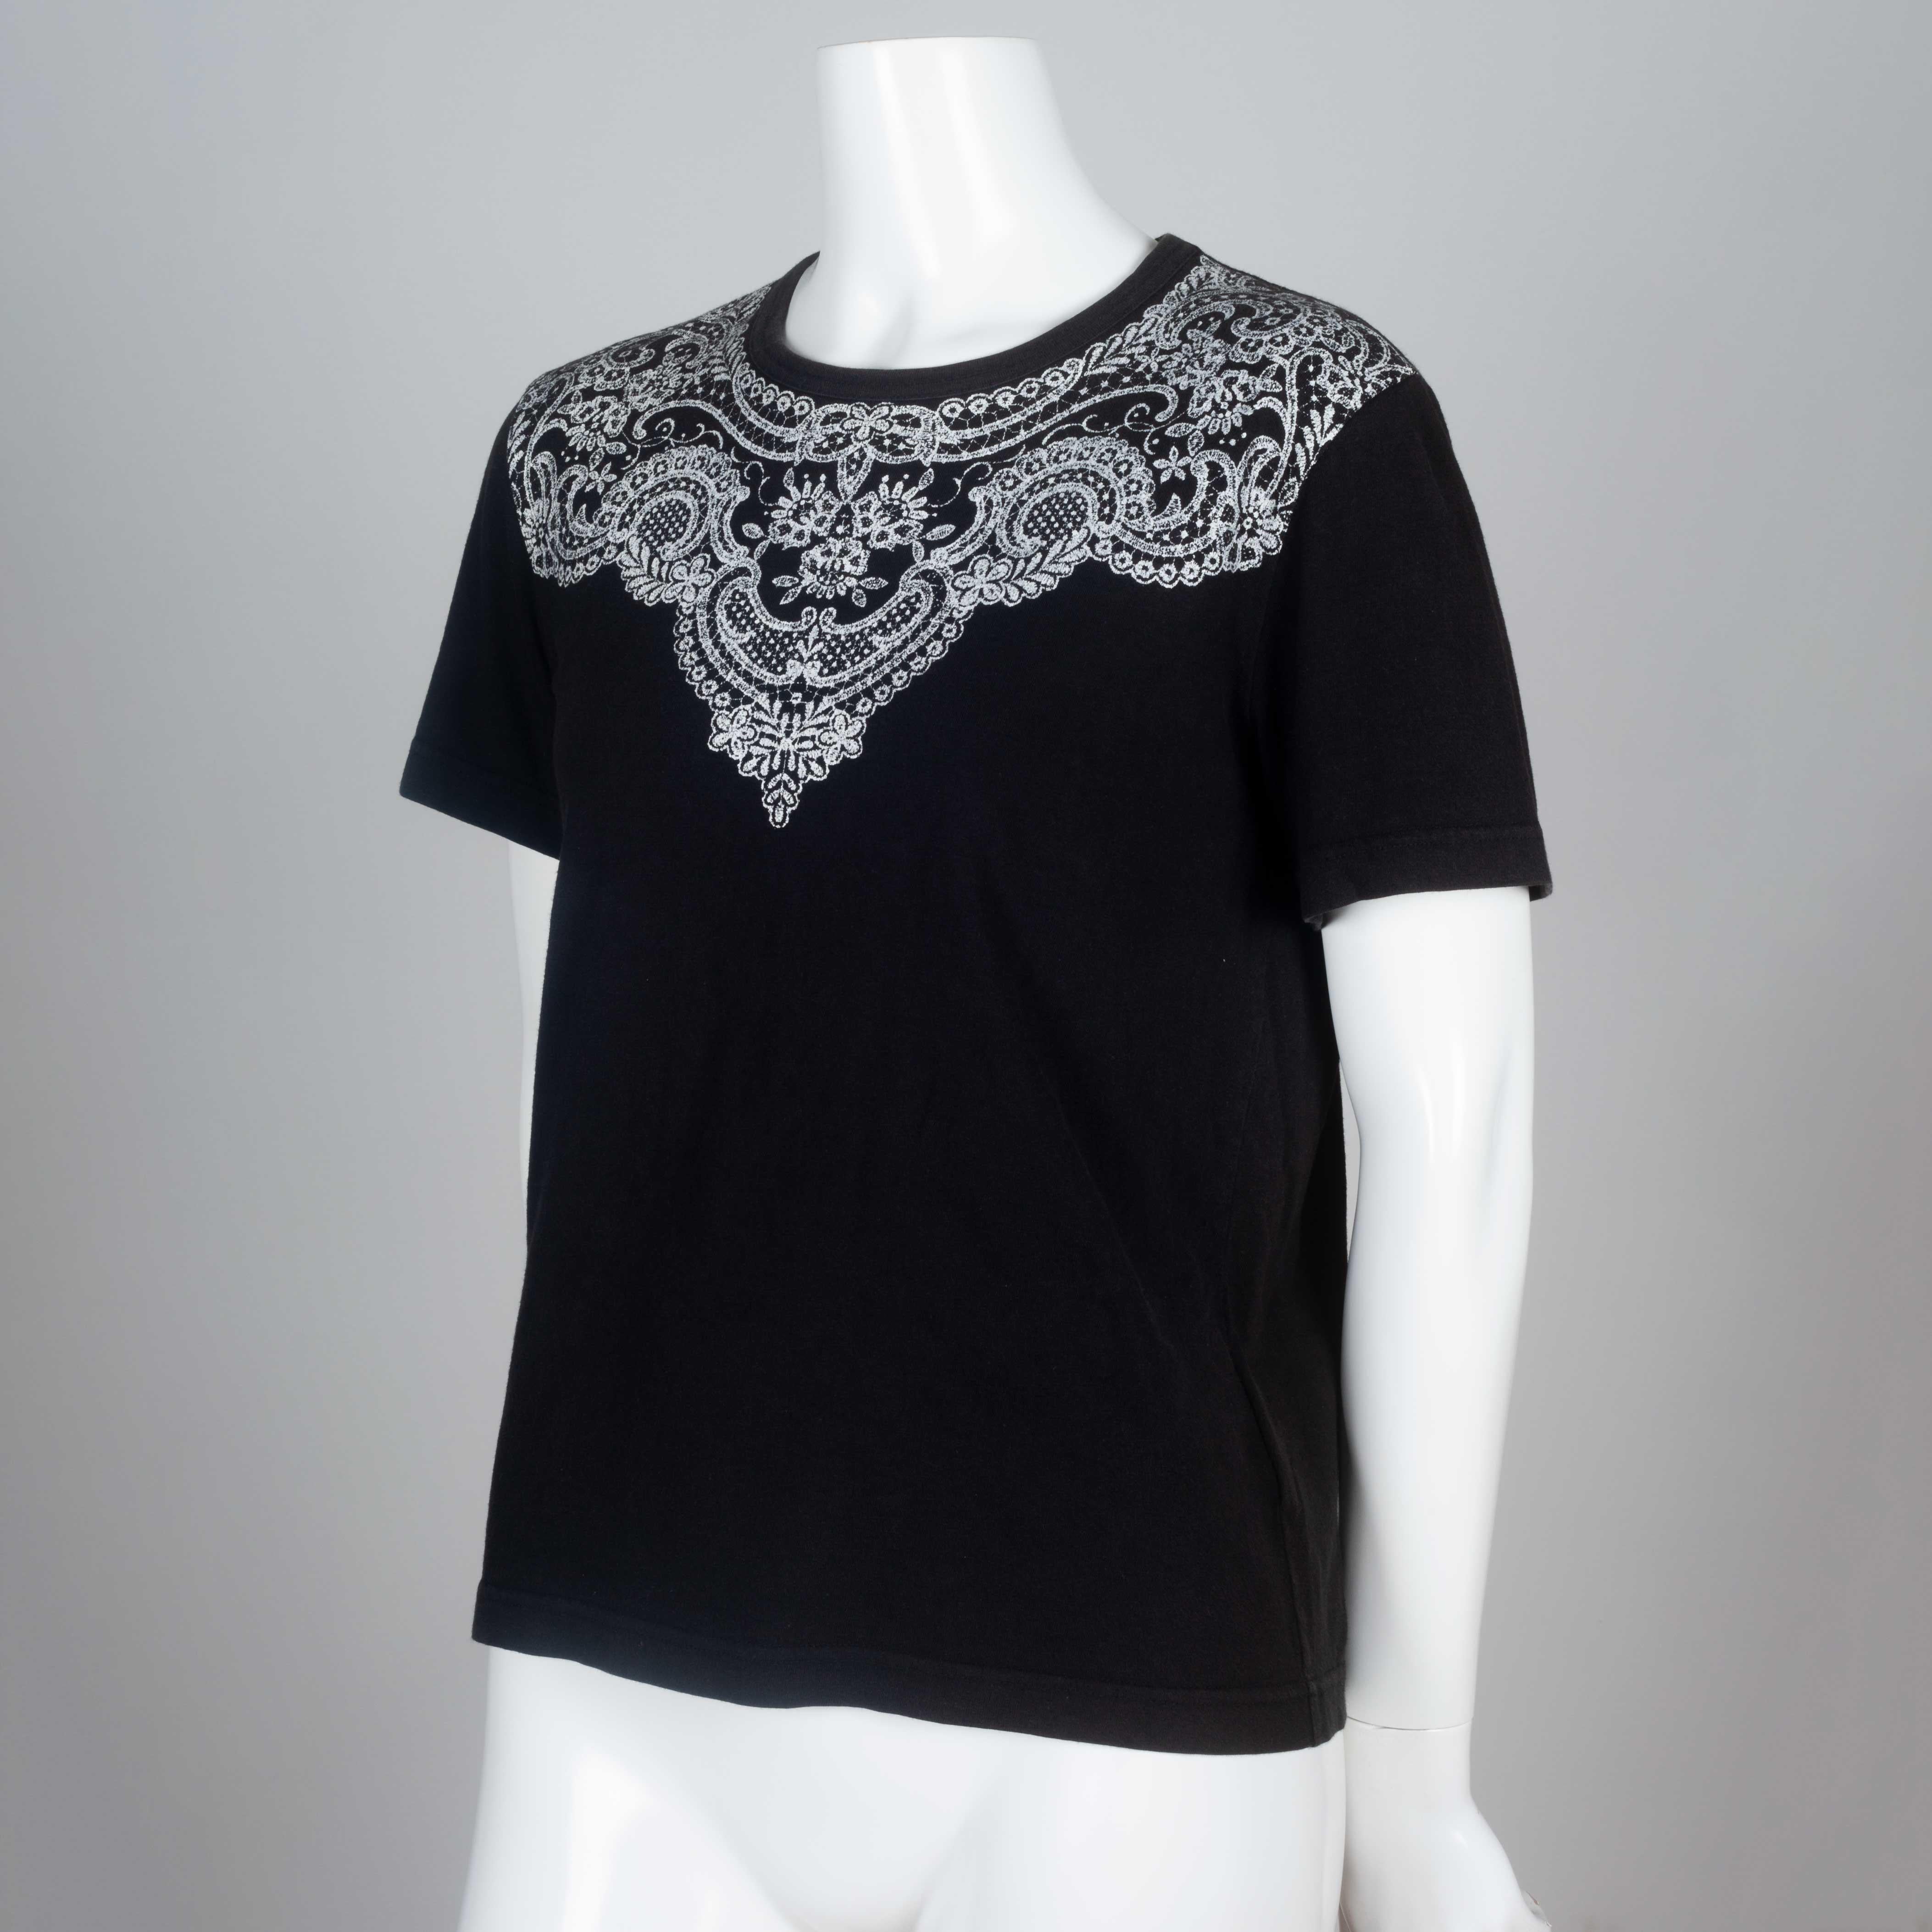 Comme des Garçons 2006 black tee from Japan with lace motif around collar. 

YEAR: 2006
MARKED SIZE: No size marked
US WOMEN'S: S
US MEN'S: XS
FIT: Regular
CHEST: 17